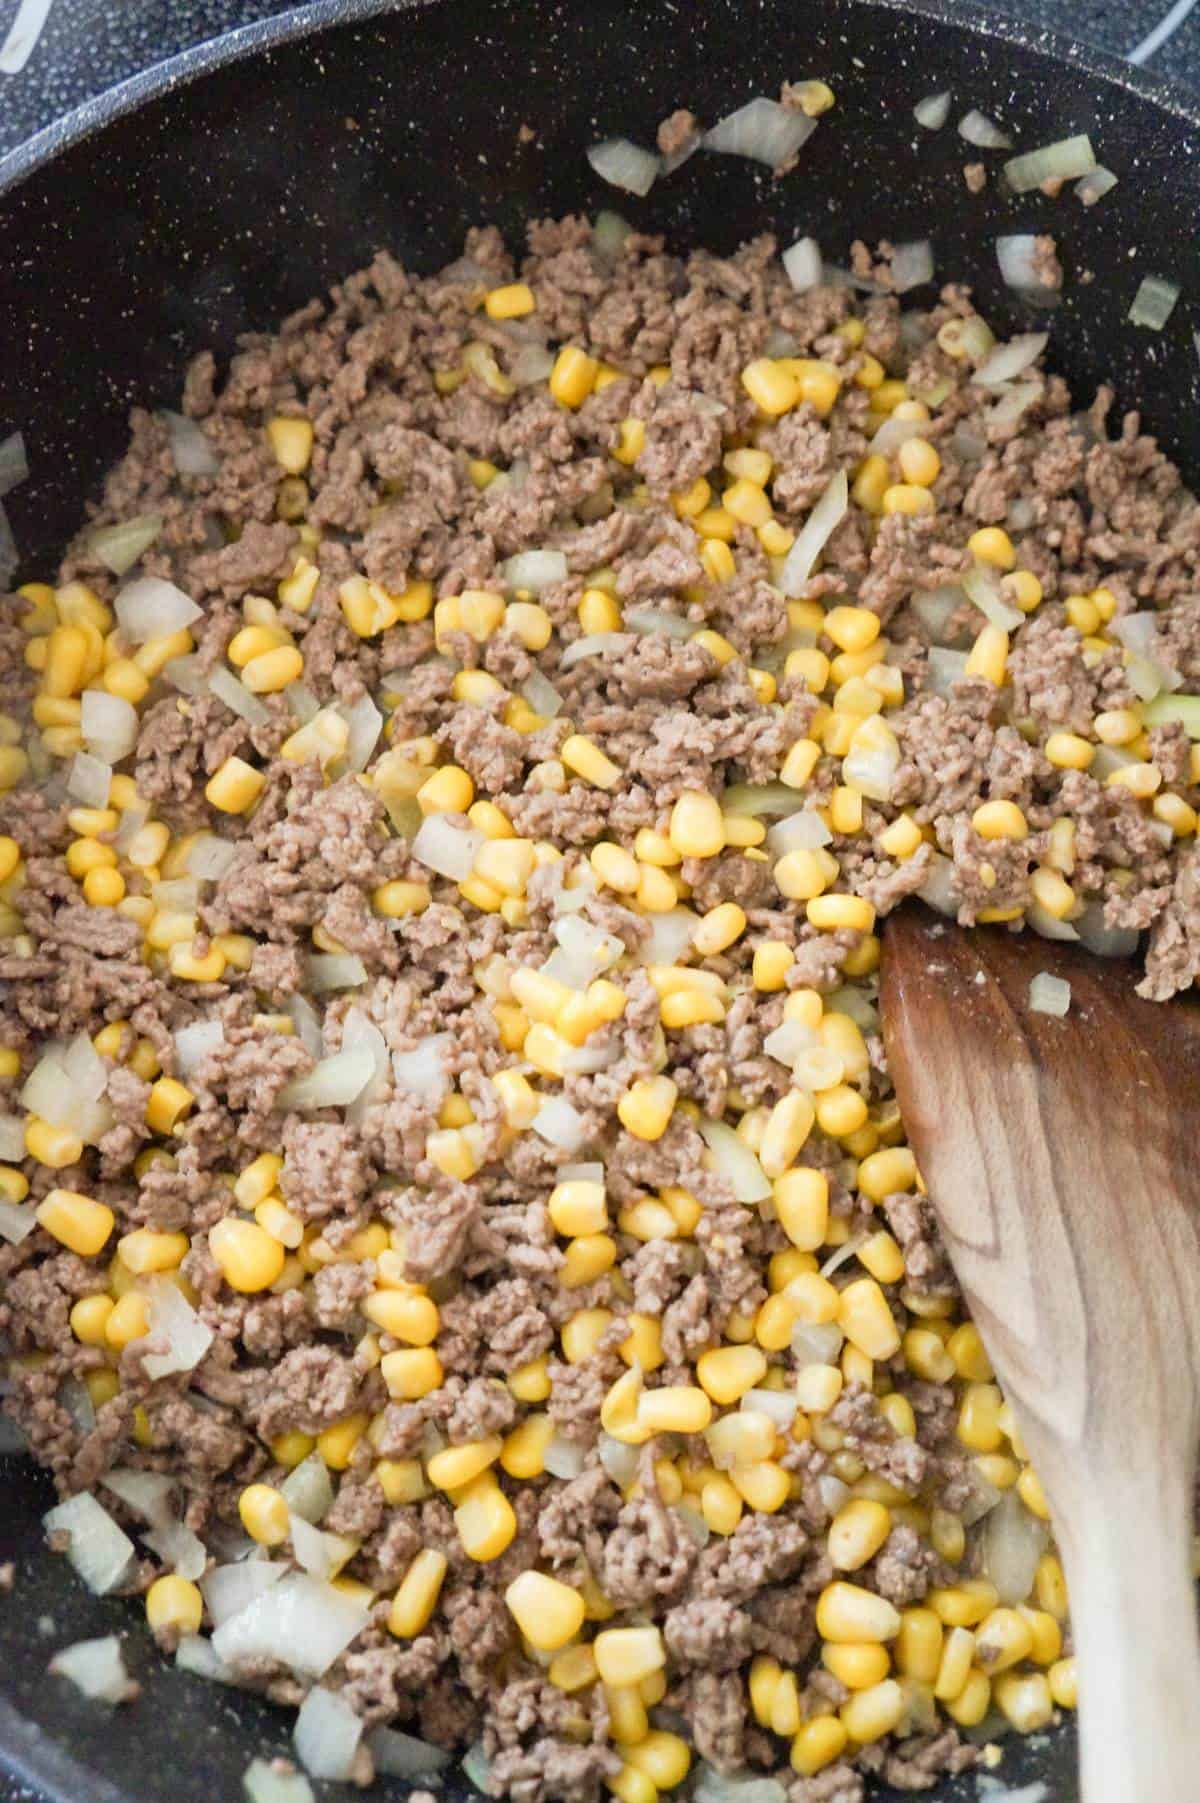 diced onions, corn and ground beef in a saute pan